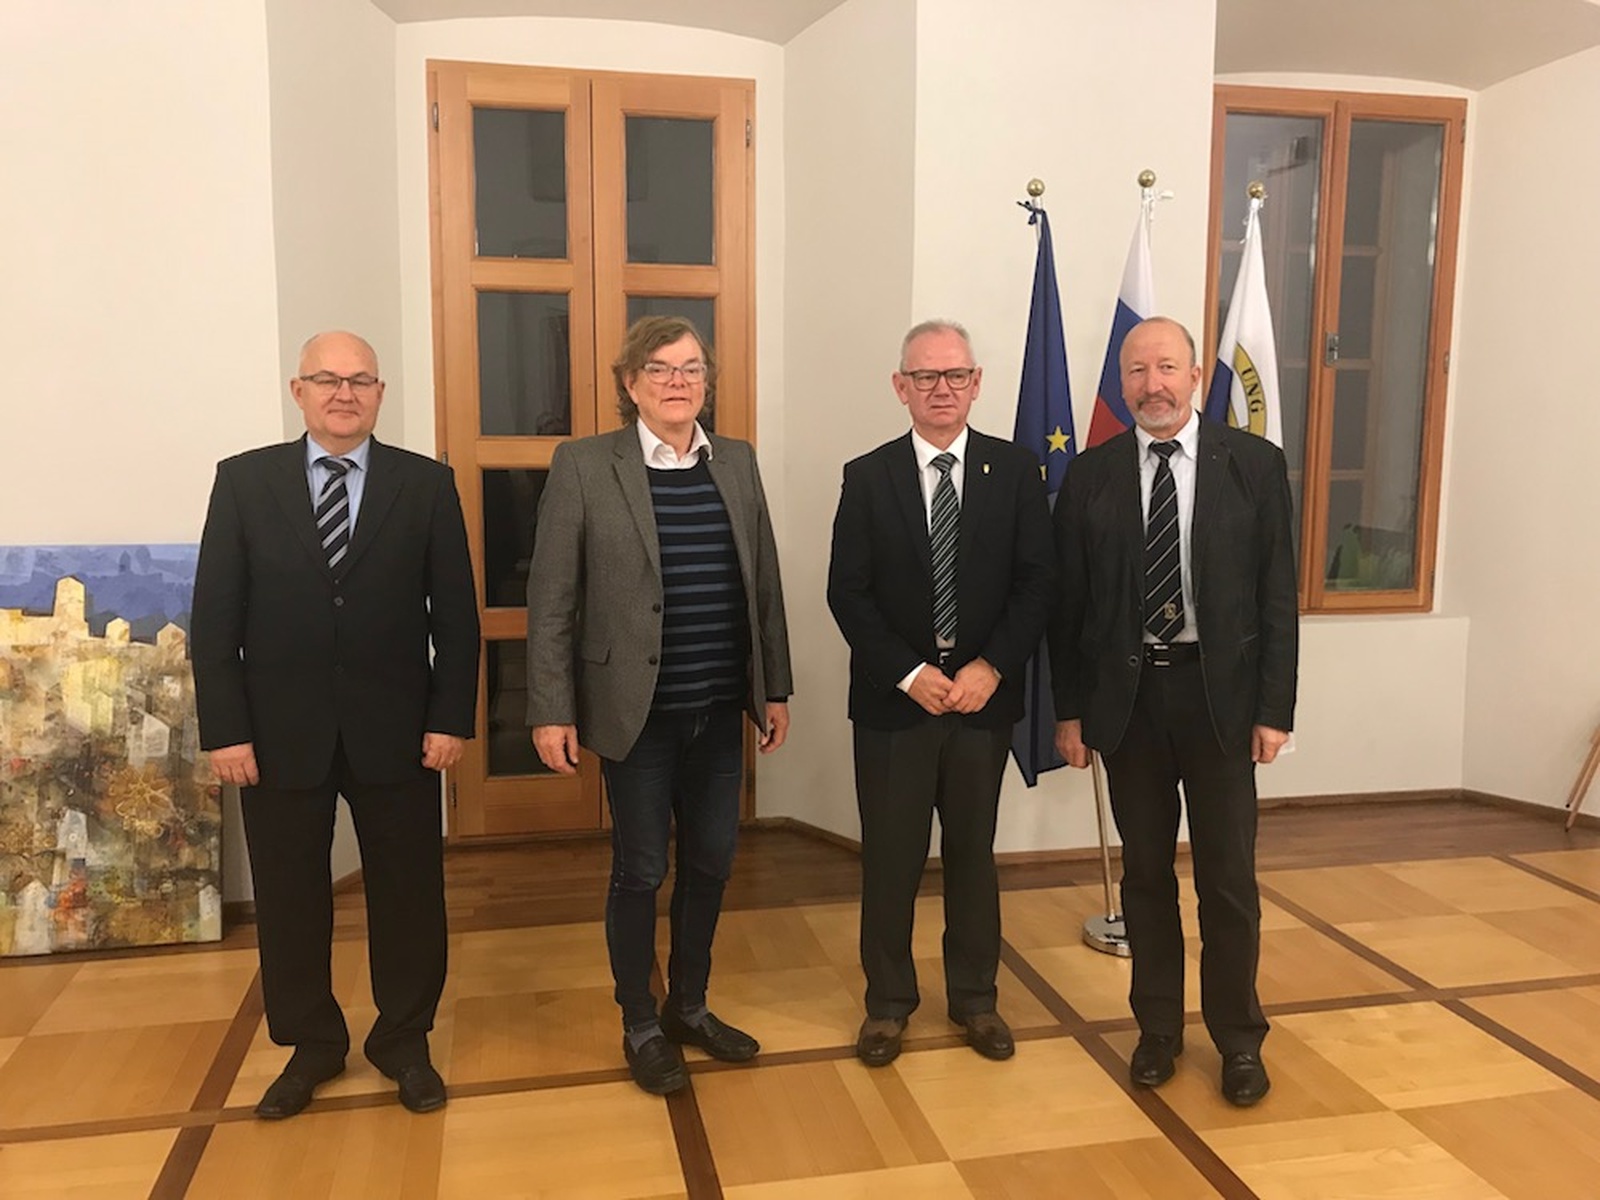 From left to right: Vice-rector for Research and Arts, Prof. Dr. Gvido Bratina, Minister for Economic Development of the Guernsey island, Deputy Charles Parkinson, Rector of the University of Nova Gorica, Prof. Dr. Danilo Zavrtanik and Vice-rector for Education, Prof. Dr. Mladen Franko.